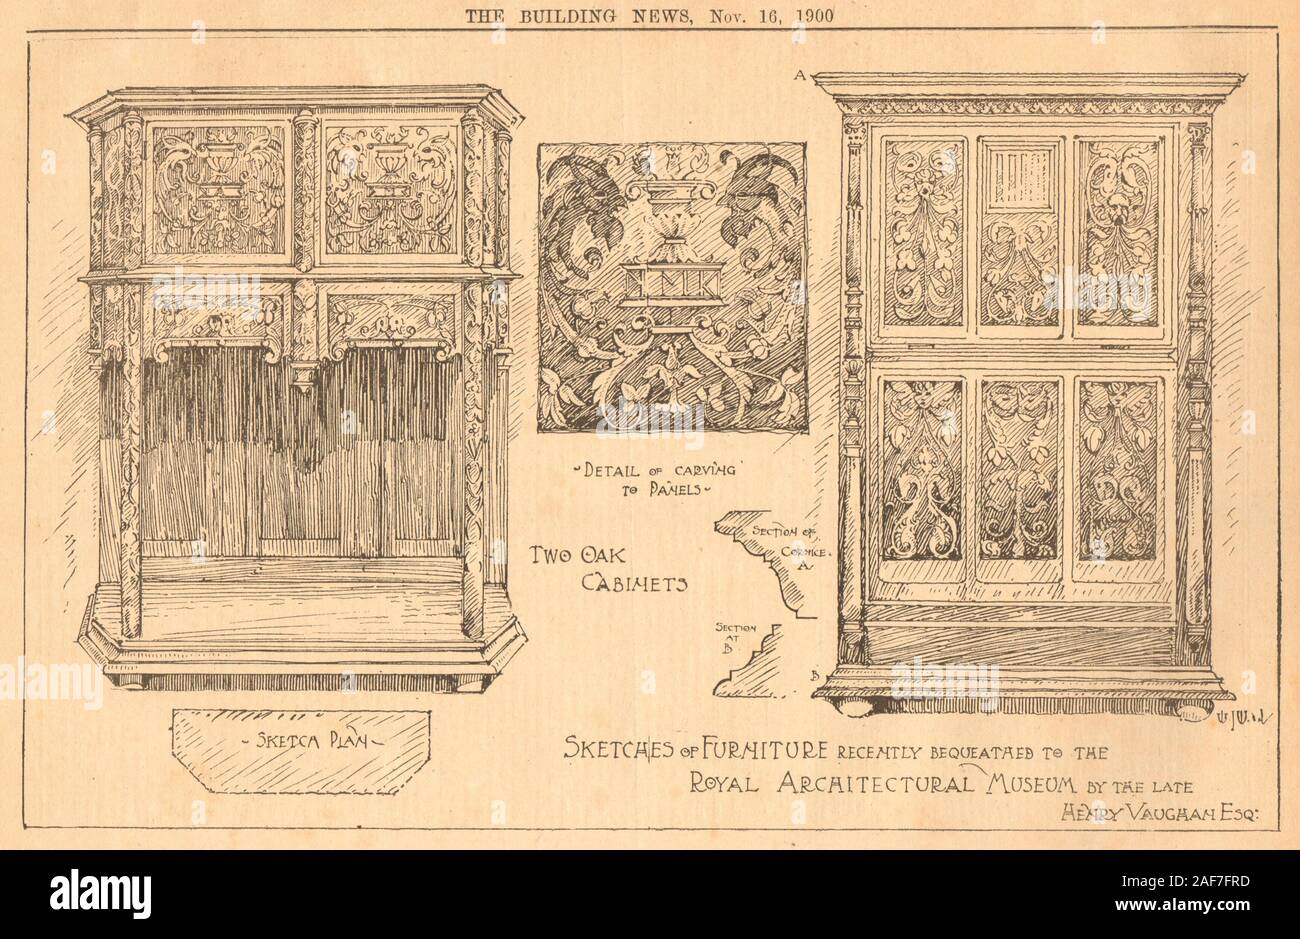 Furniture bequest Royal Architectural Museum Henry Vaughan. Oak cabinets 1900 Stock Photo